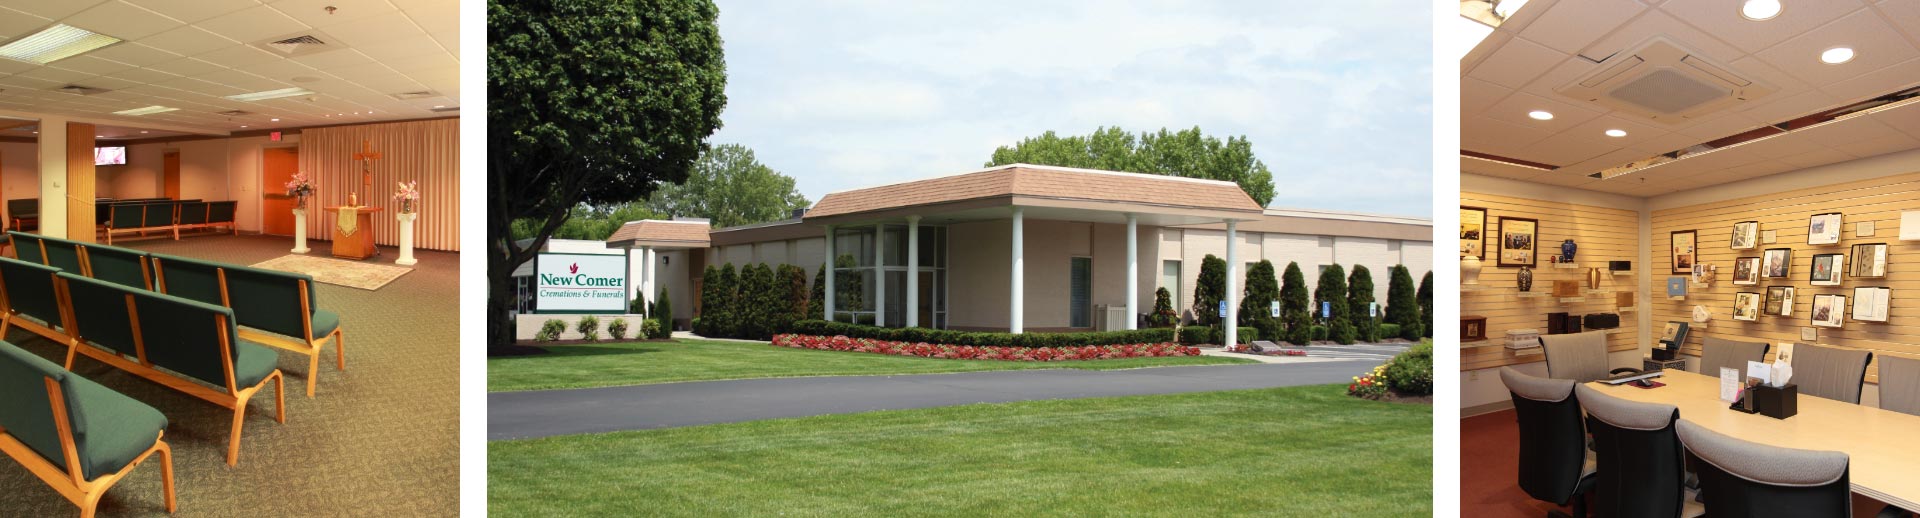 Funeral-Home-Colonie-NY.